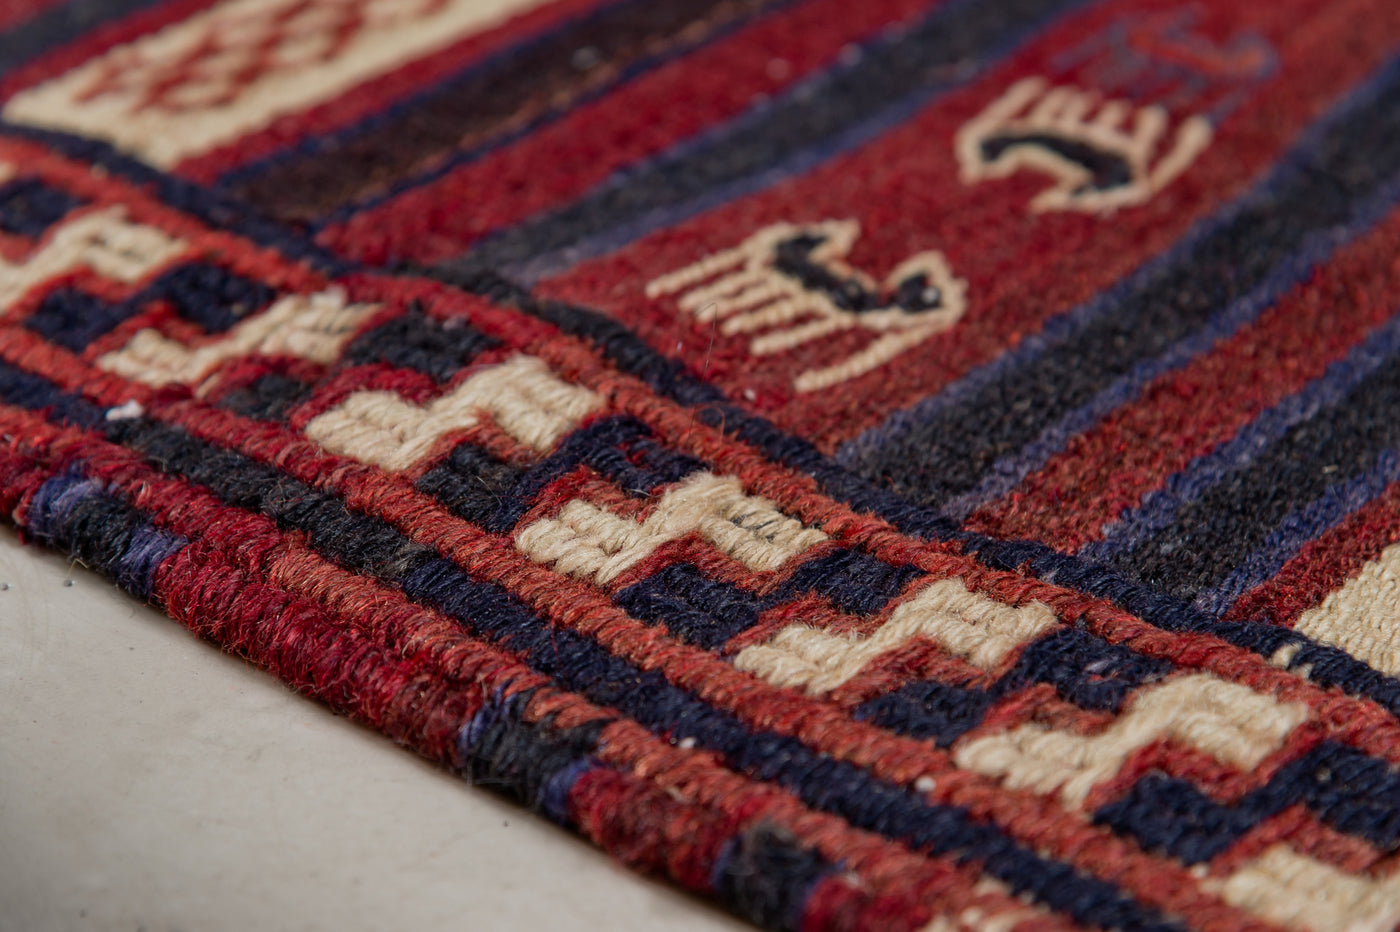 THE KNOTS - Vintage Persian Kilim Teppich - handgemacht - Carpet - Rug - handmade - pattern - muster - wool - wolle - diamond - red - burgundy - brown - striped